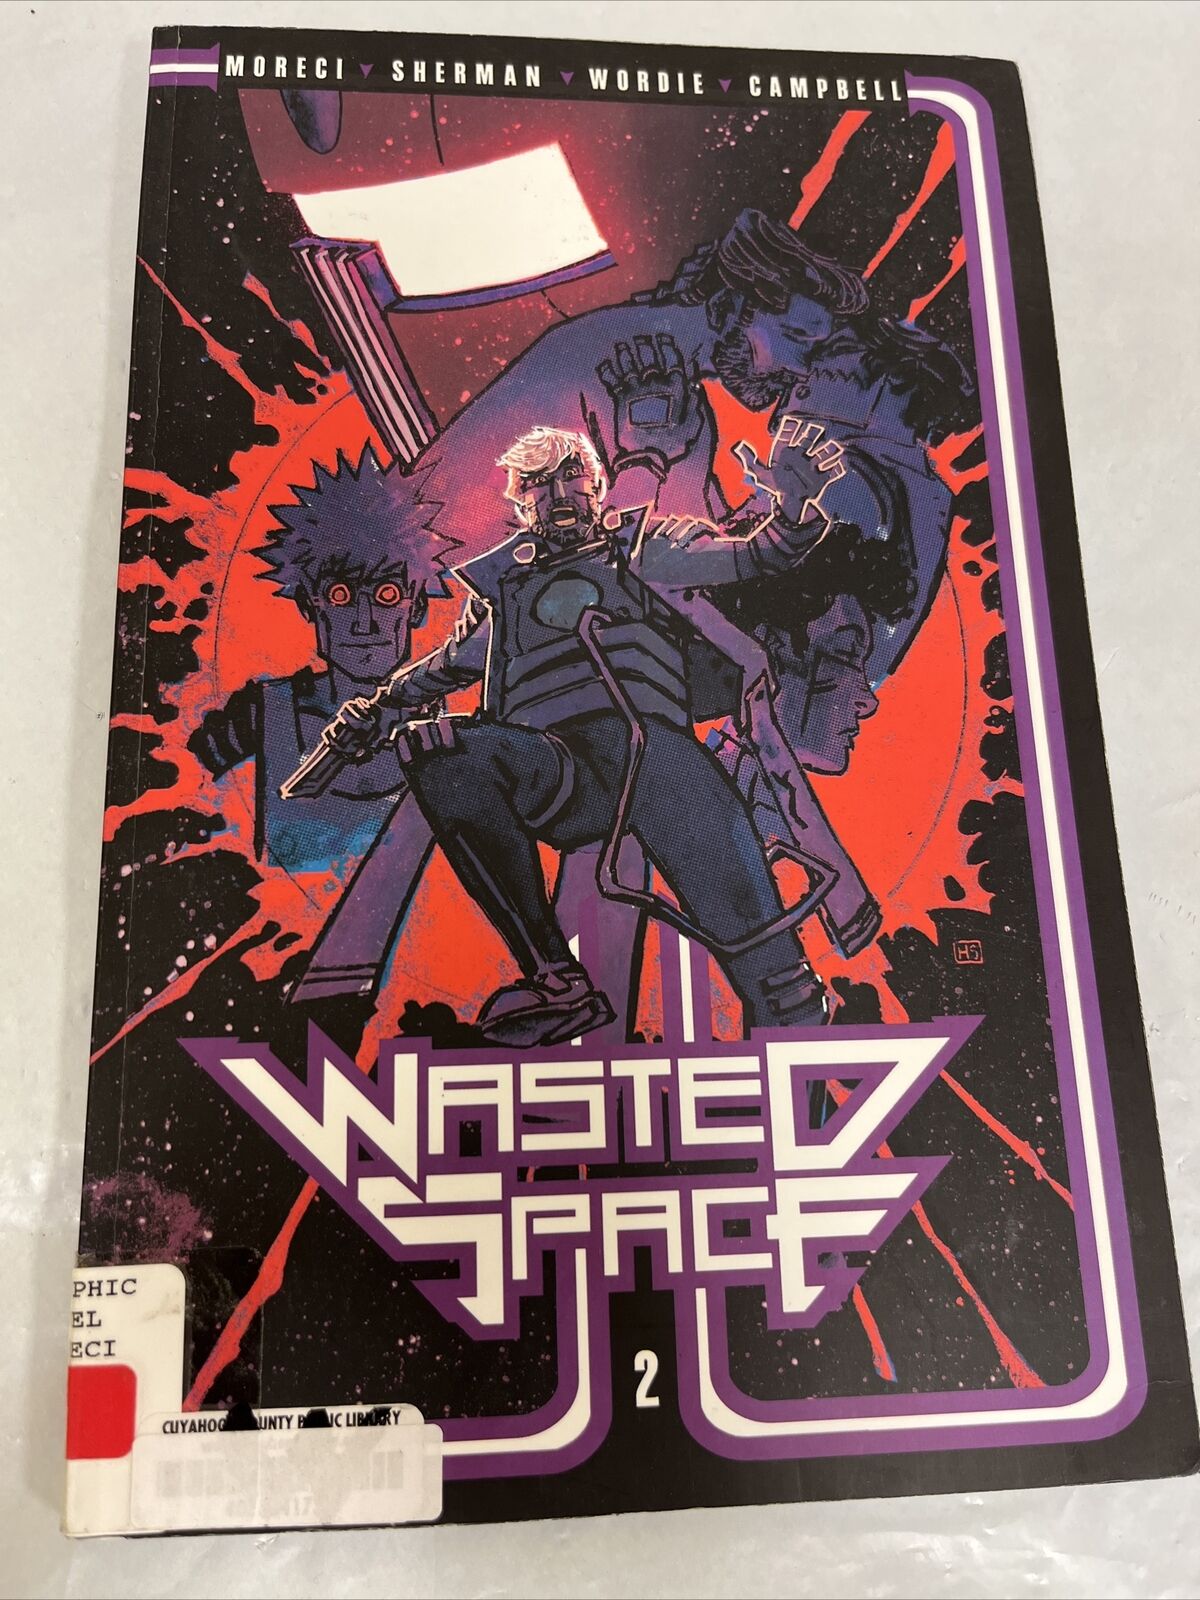 Wasted Space Vol. 2 by Michael Moreci & Hayden Sherman